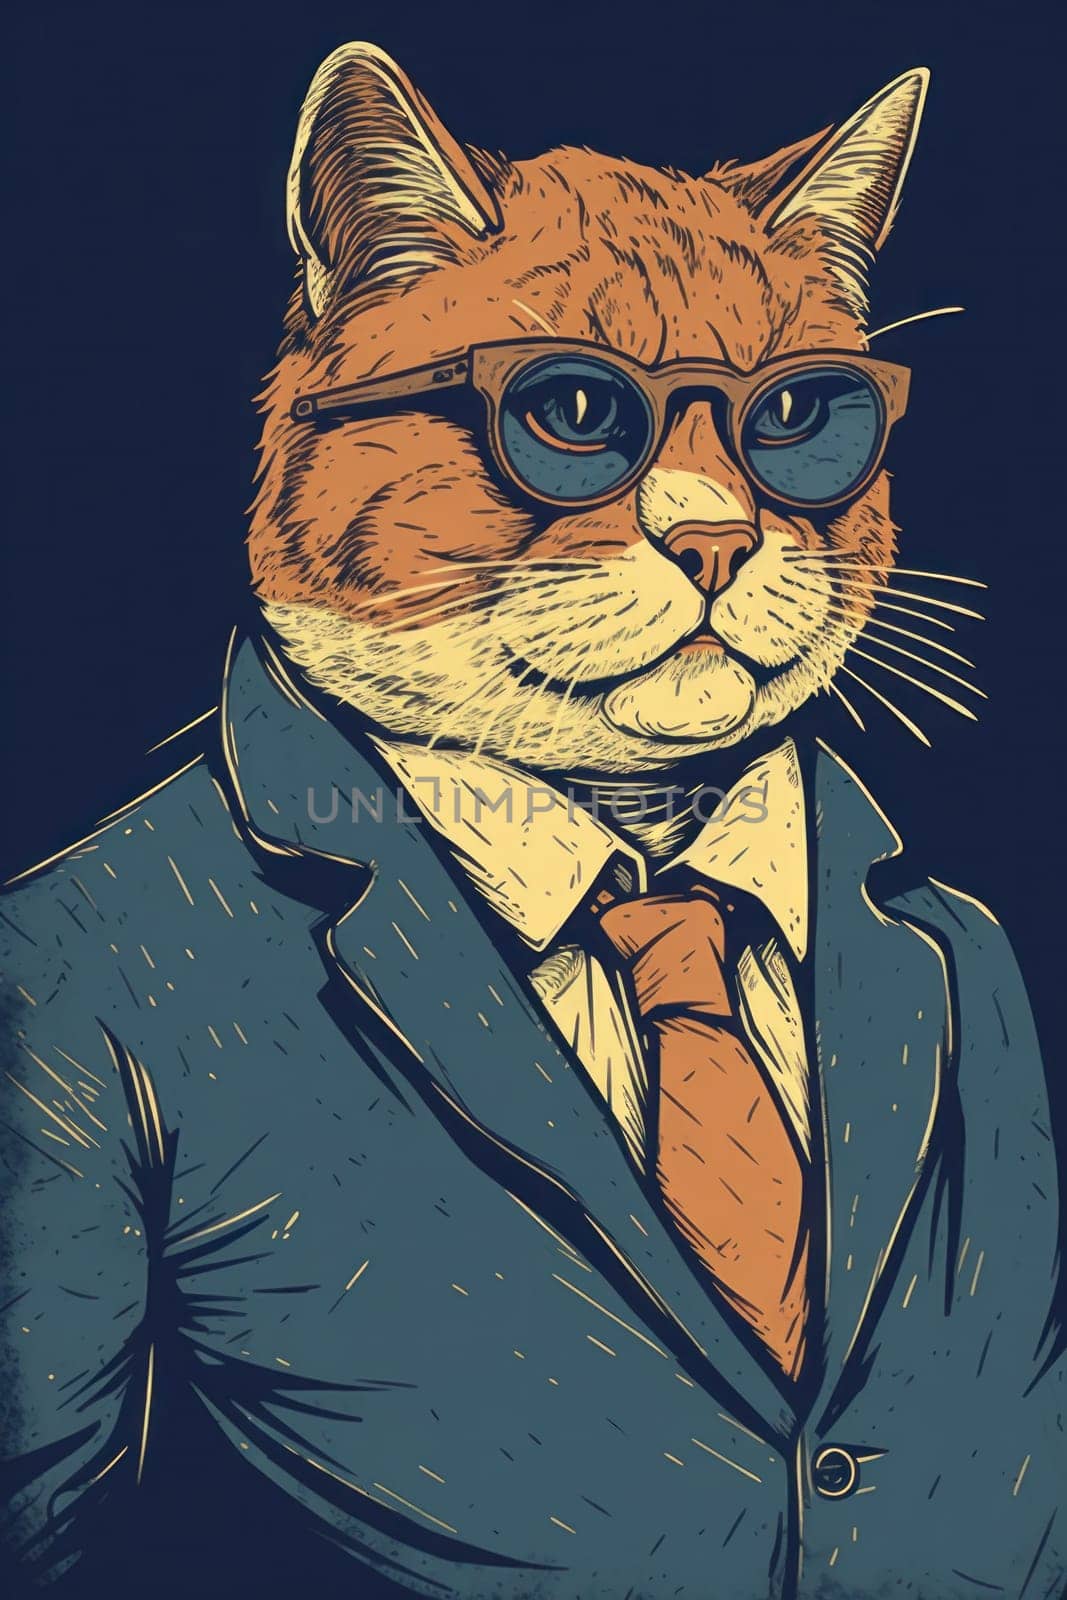 A cat in a suit and tie wearing glasses, AI by starush